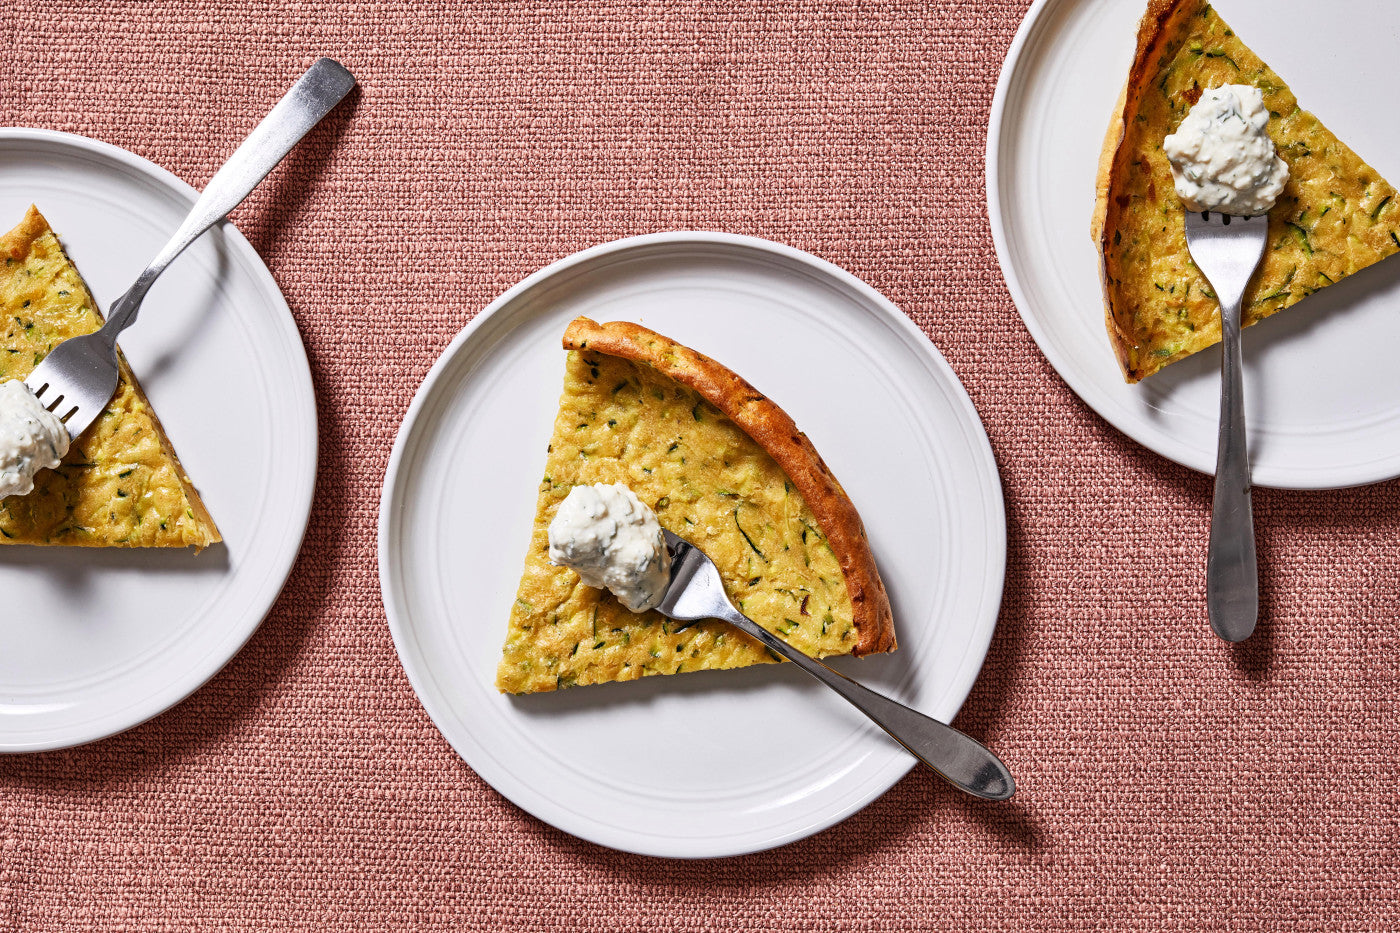 To deal with that glut of zucchini, a big, skillet pancake to the rescue